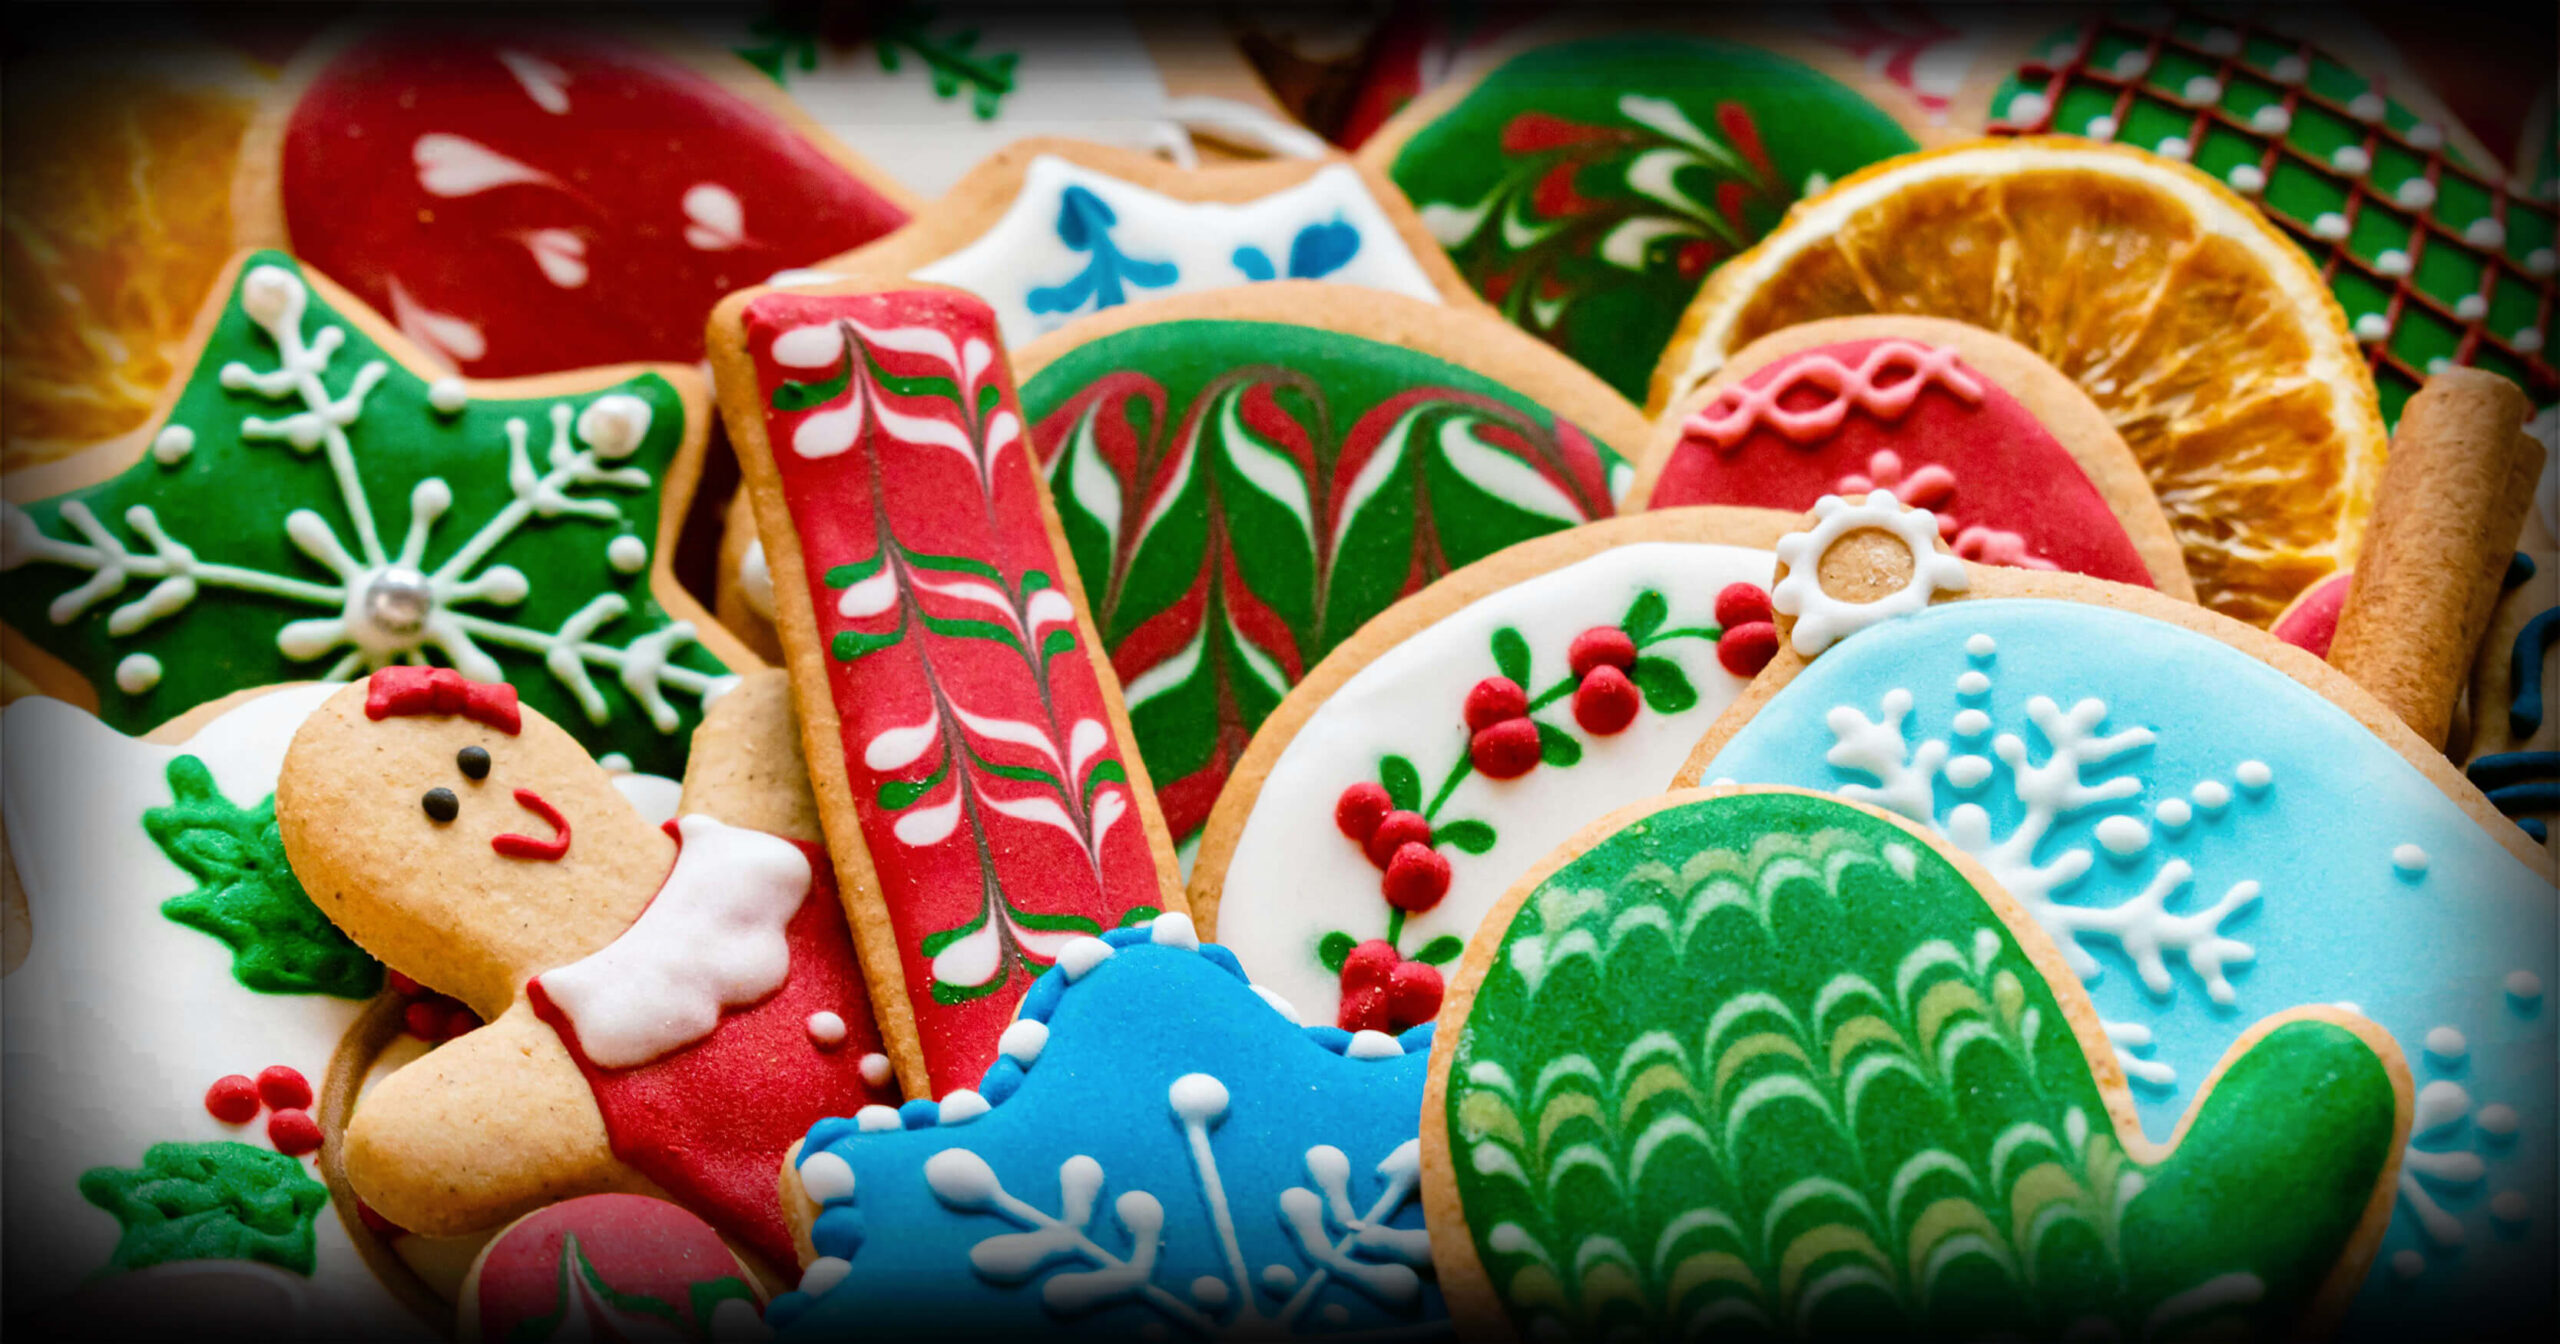 Treat Your Family To Cookies With Mrs. Kringle at Tower City Center in Cleveland, Ohio.